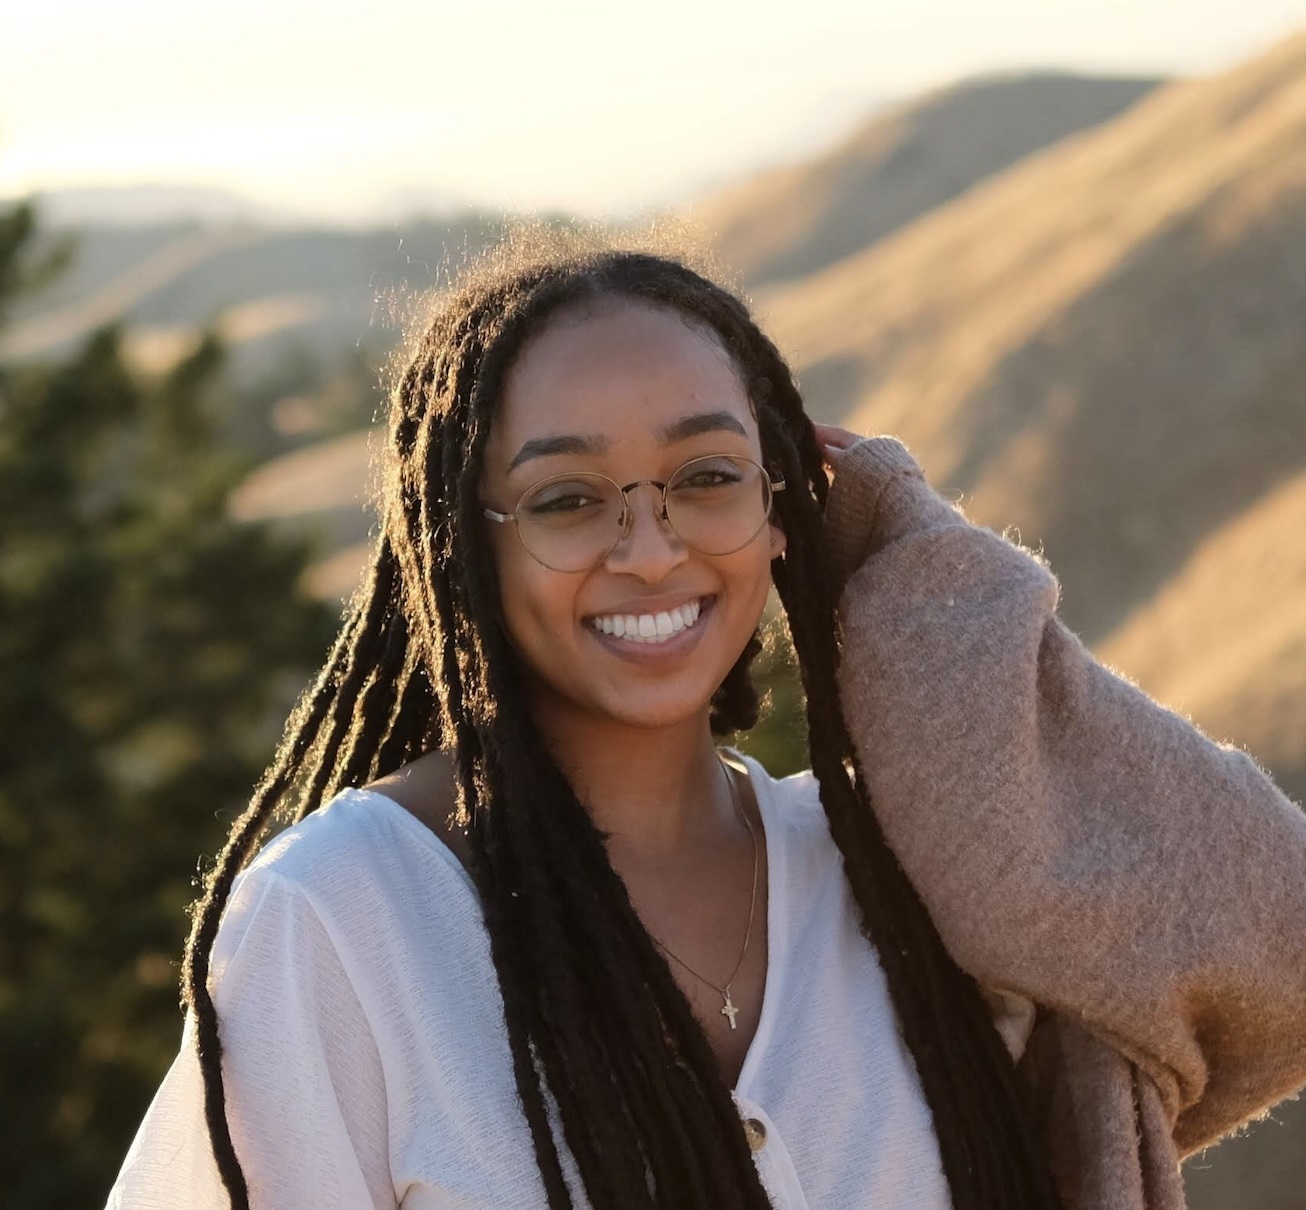 Headshot of Betania, an Ethiopian nonbinary femme in their early 20’s with black locs. She’s wearing a blouse, cardigan, glasses, and smiling at the camera